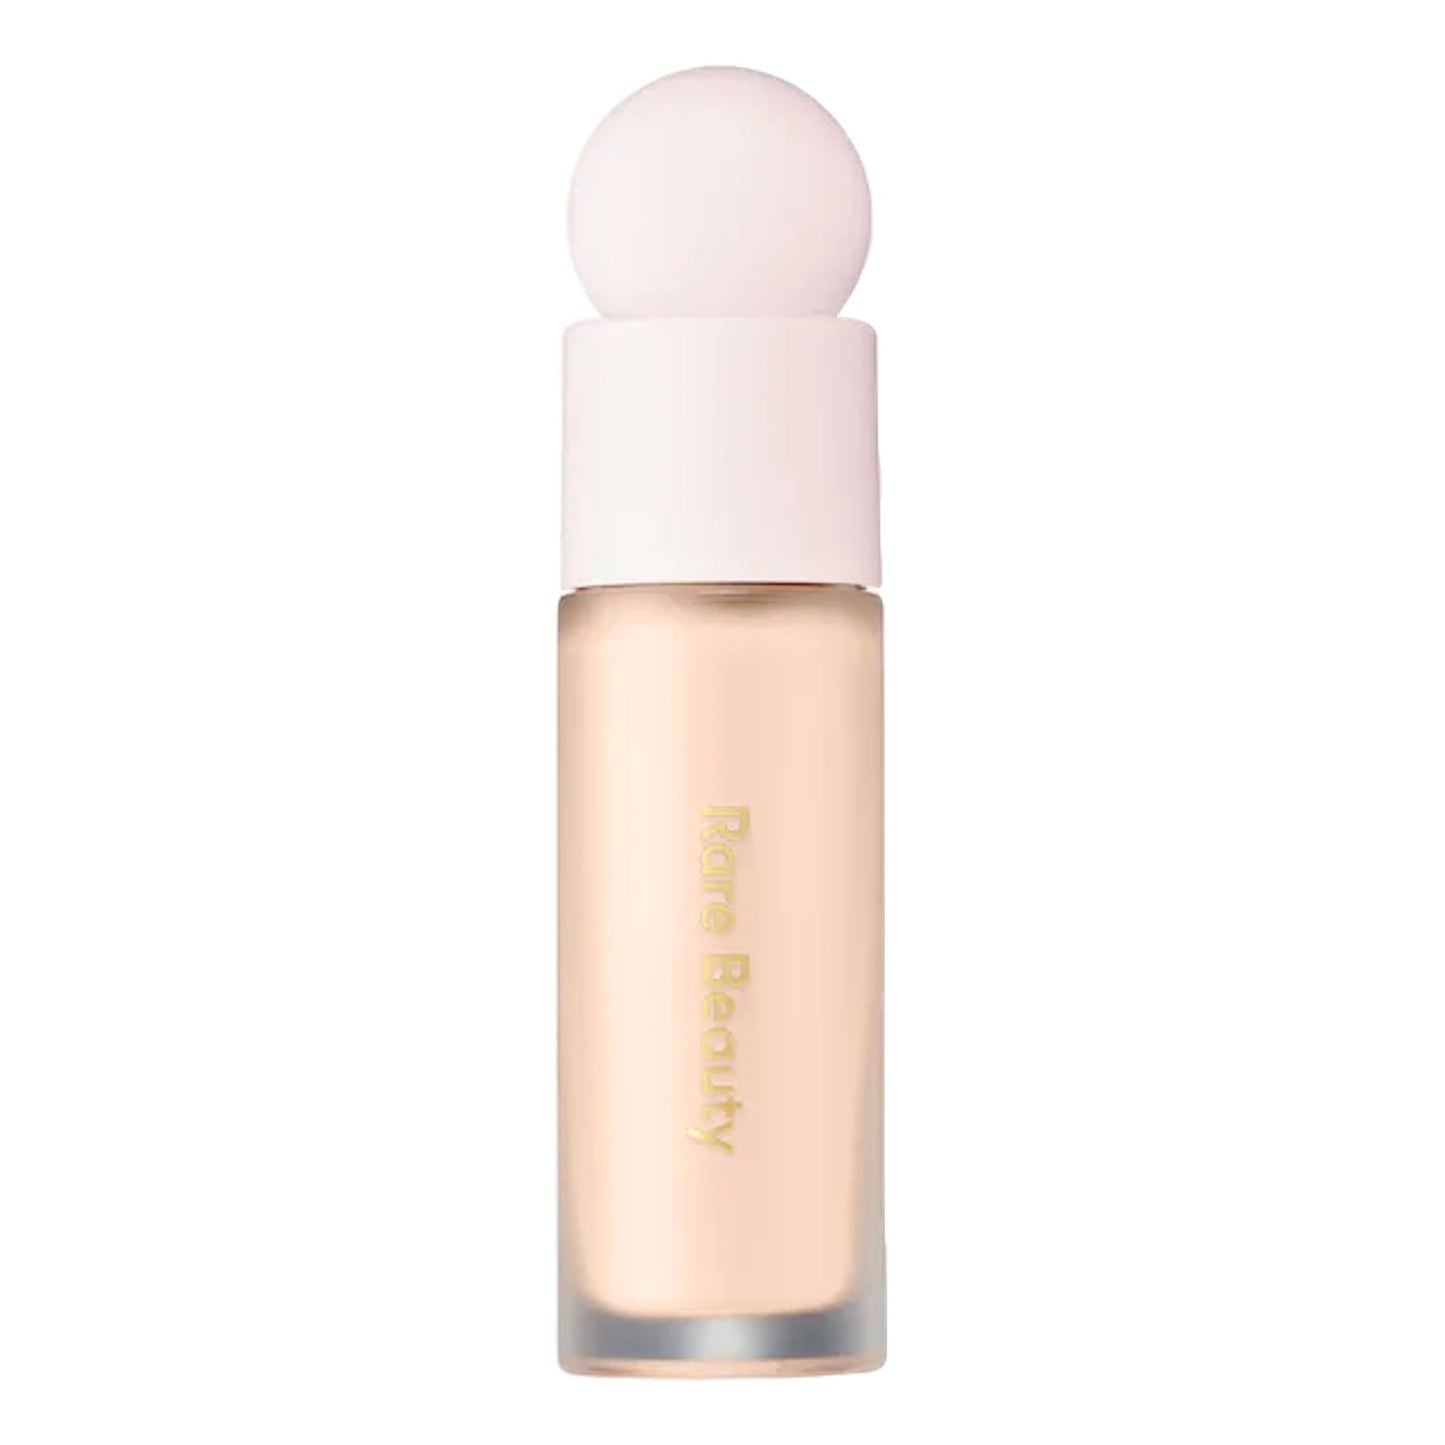 Rare Beauty by Selena Gomez Liquid Touch Brightening Concealer, Concealer, London Loves Beauty